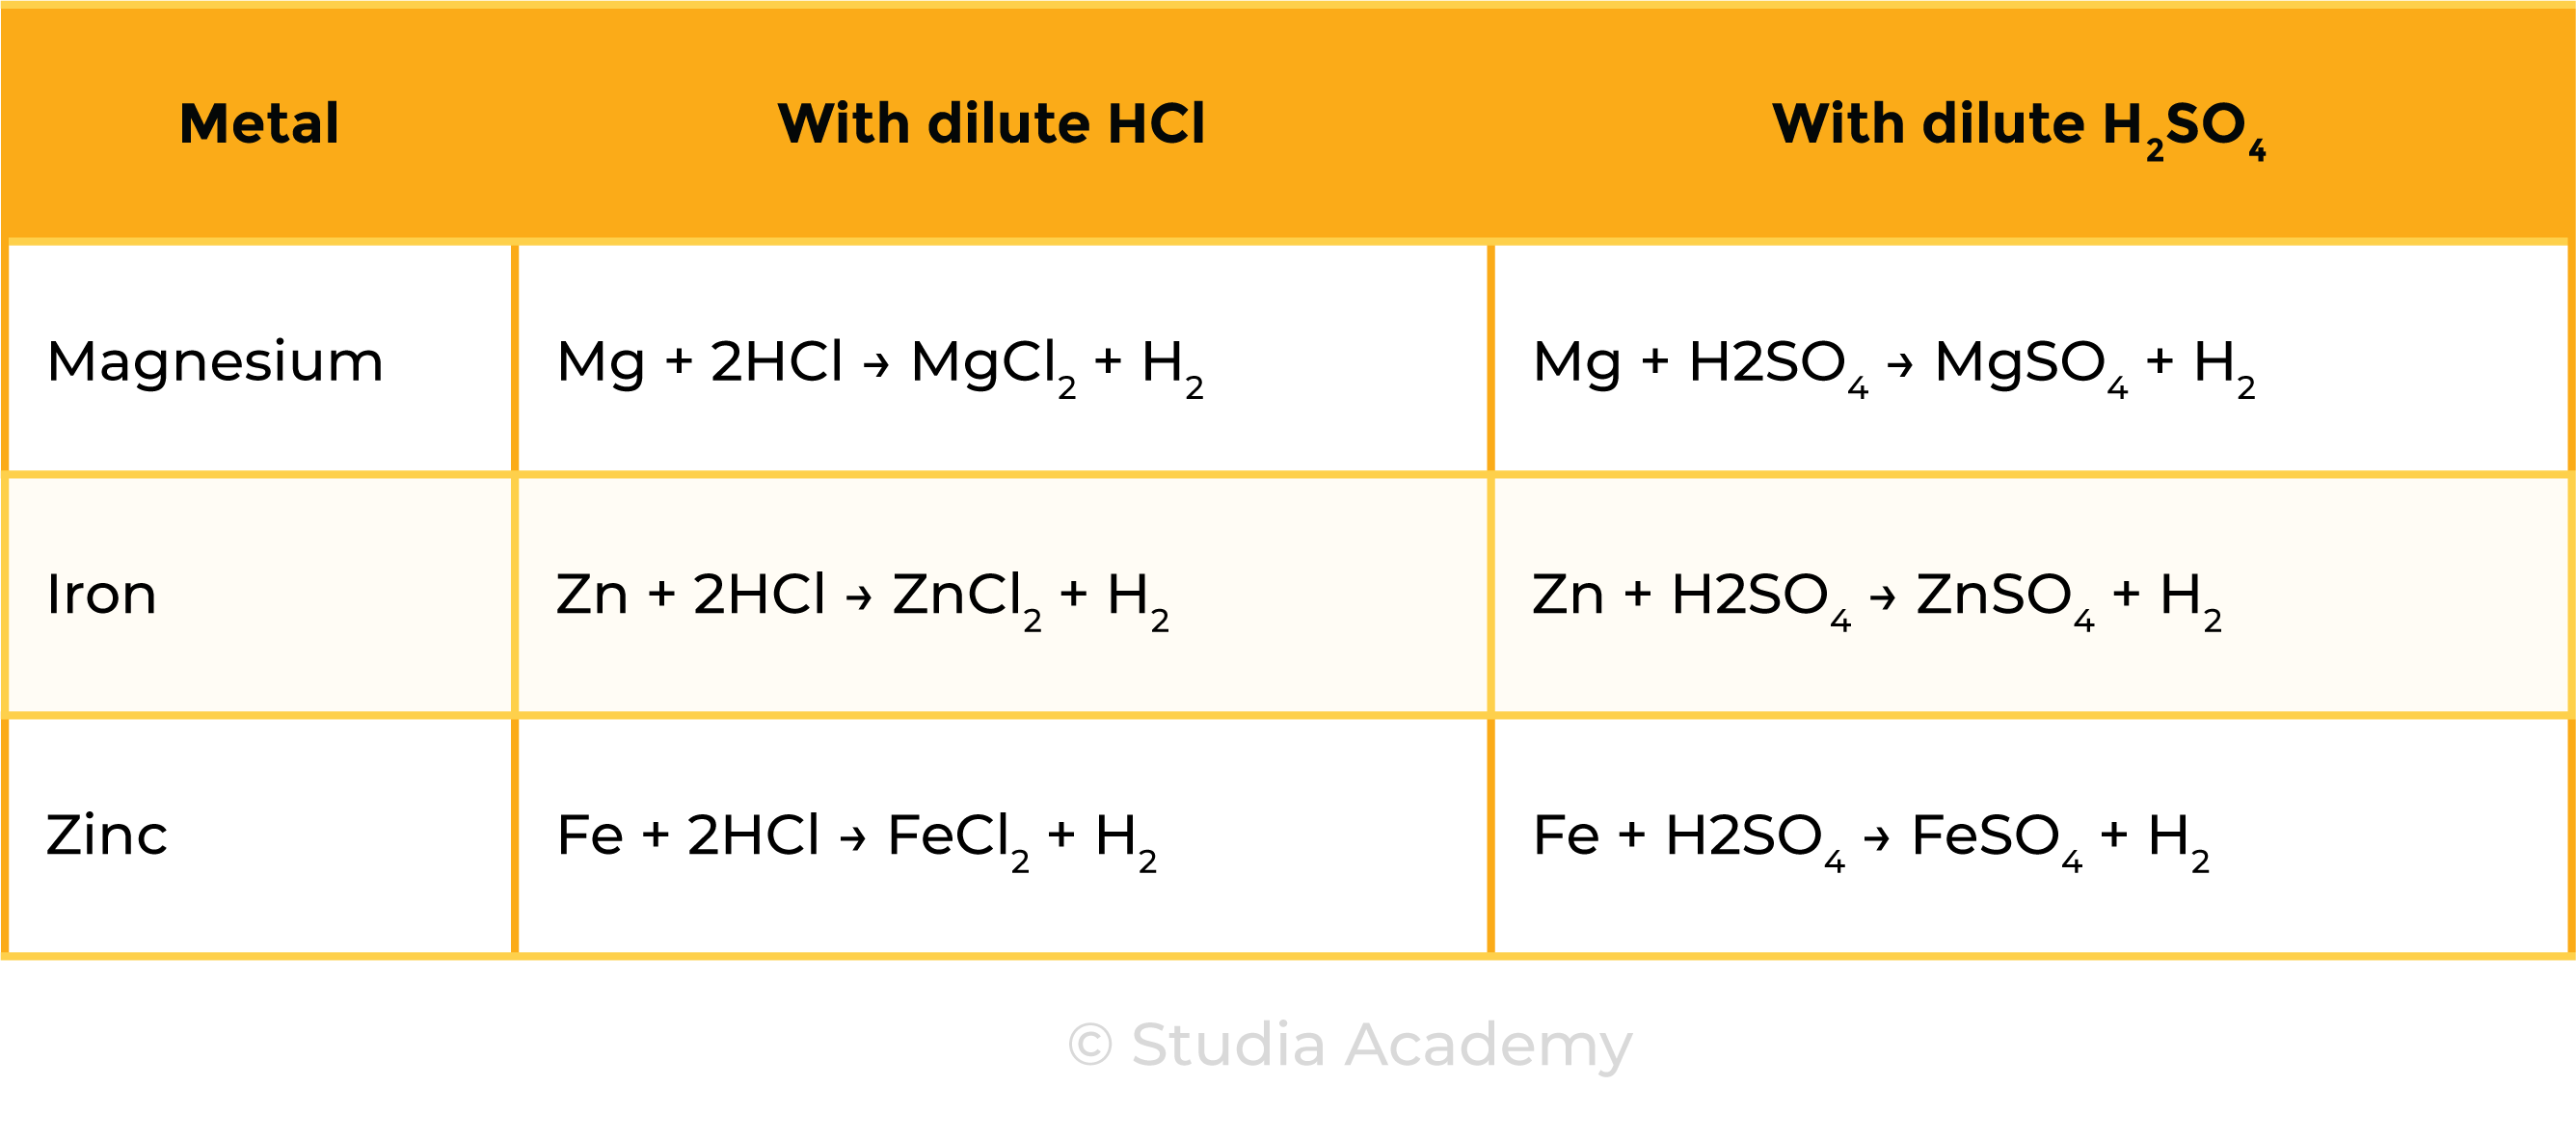 edexcel_igcse_chemistry_topic 13 tables_reactivity series_009_metals reaction with HCl and H2SO4 chemical equations